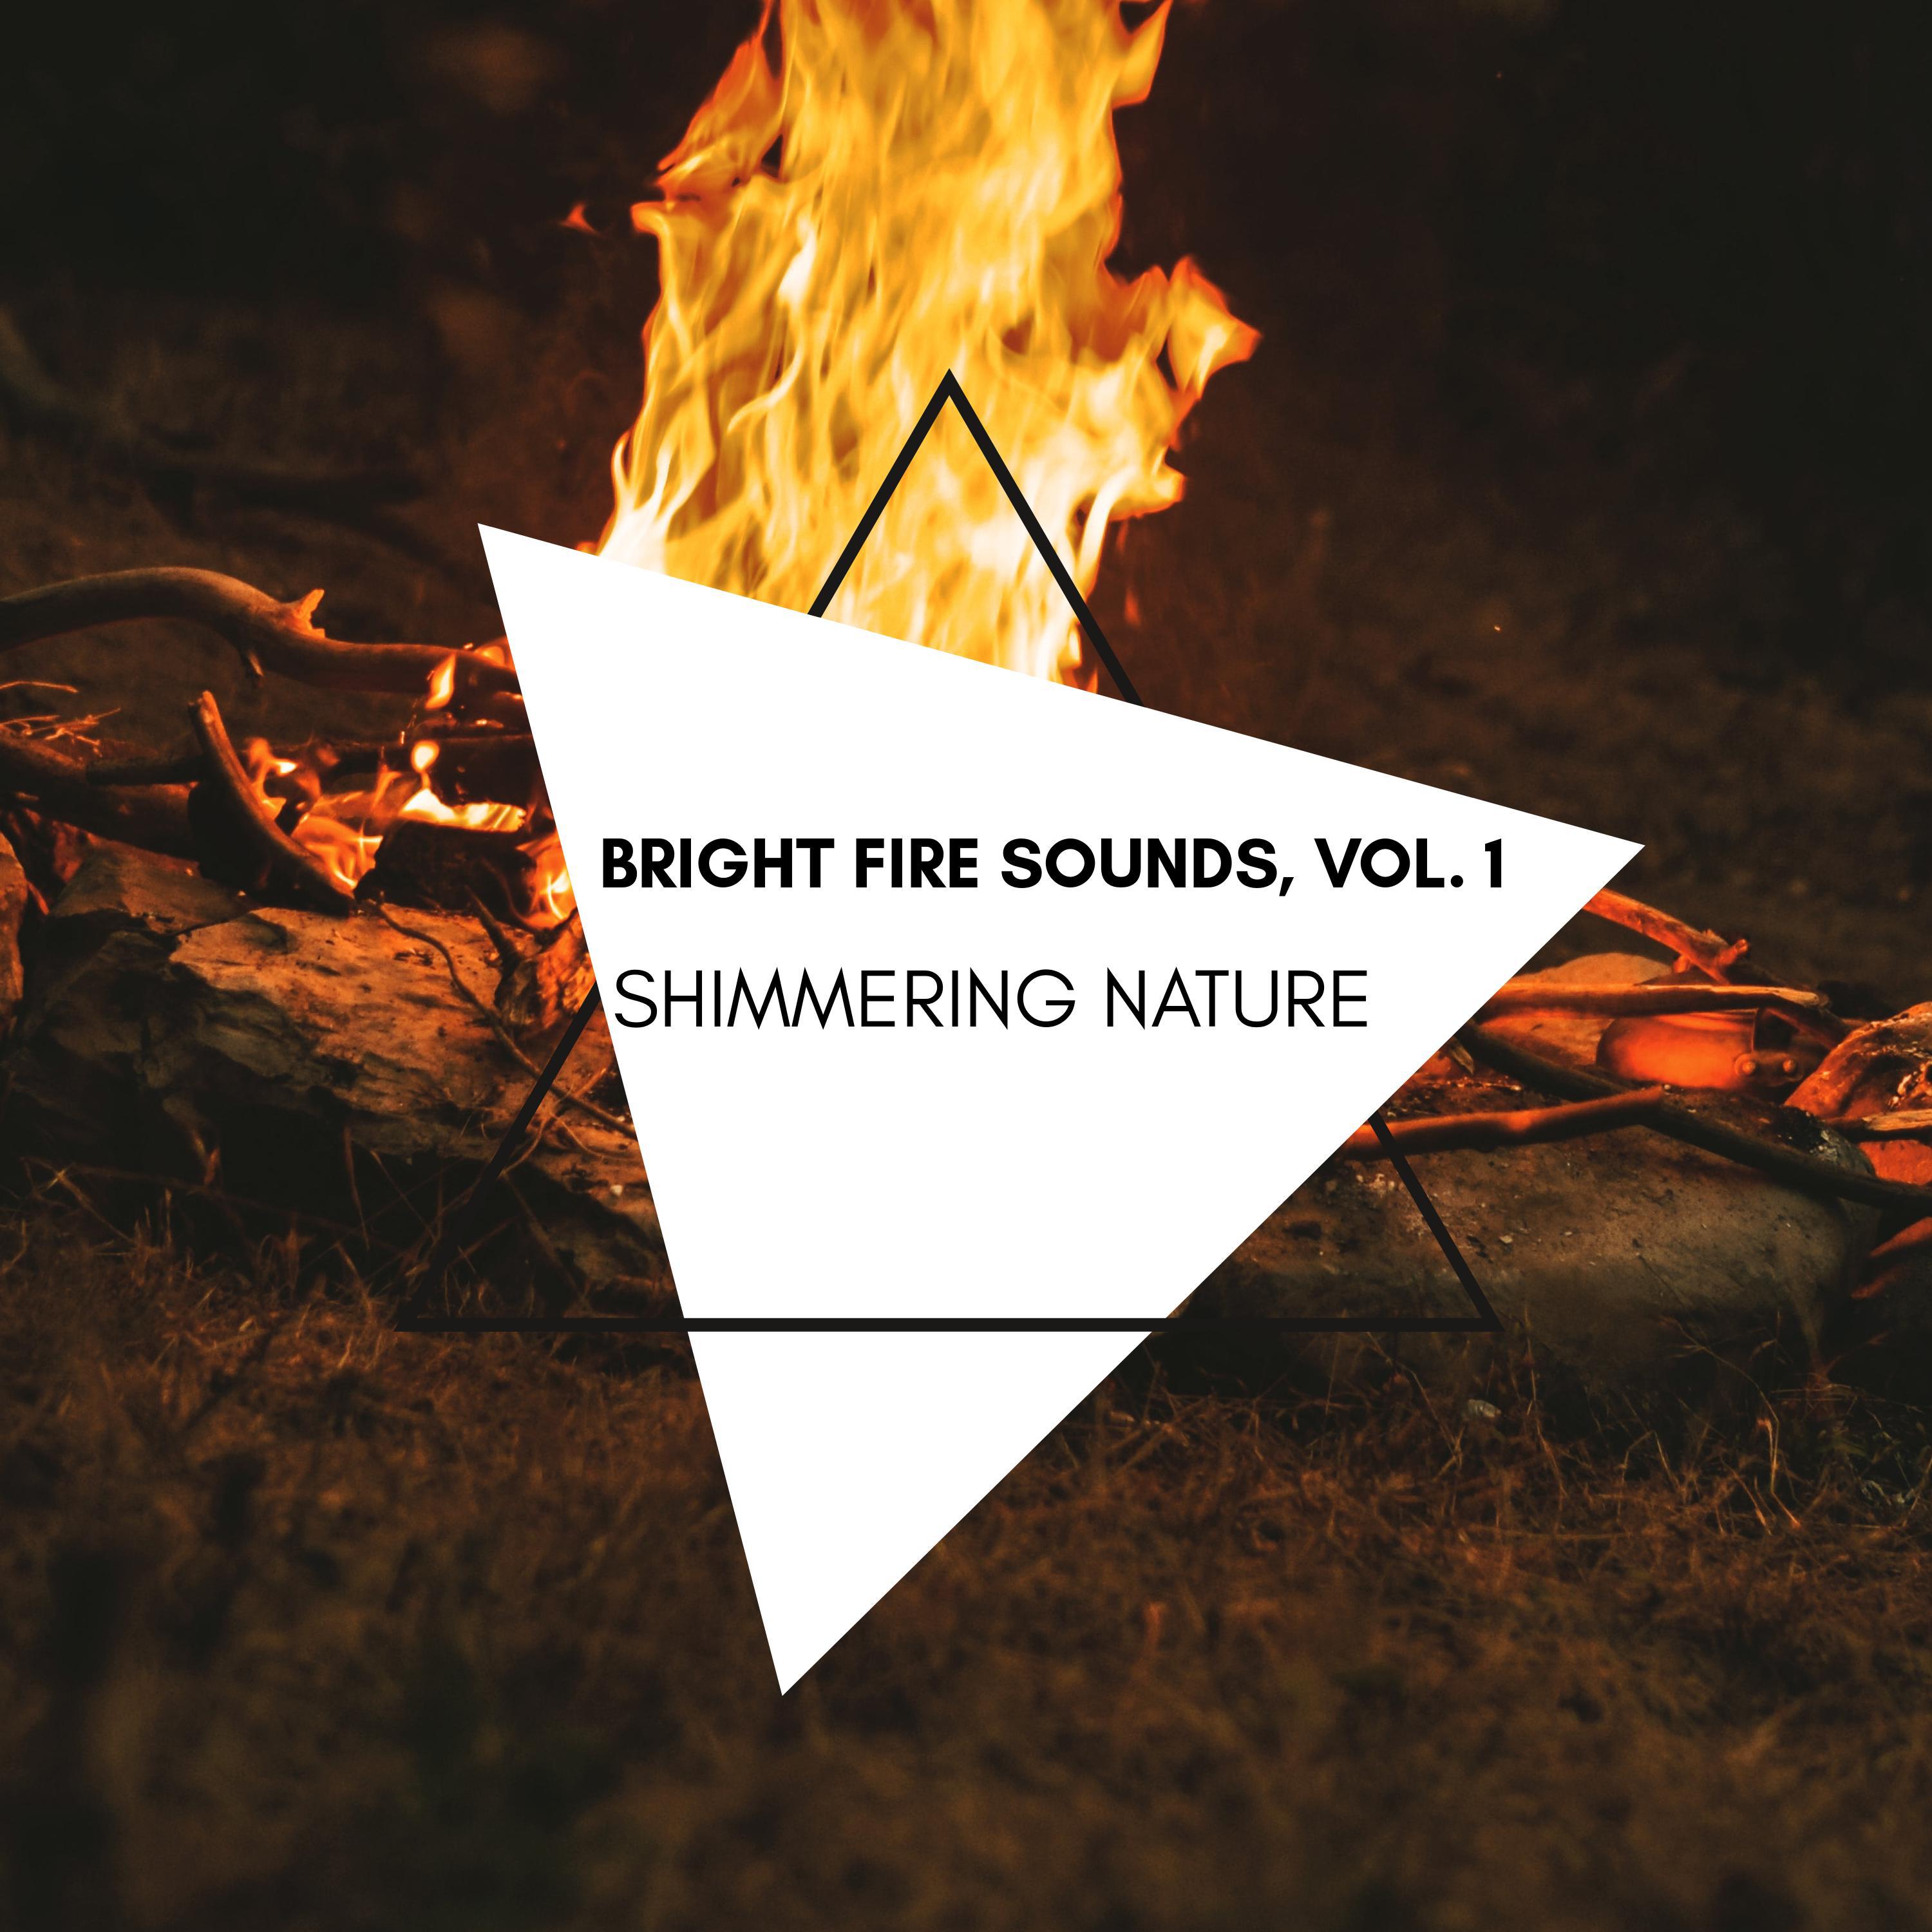 Burning Insects Nature Music - Nature Fire Sound